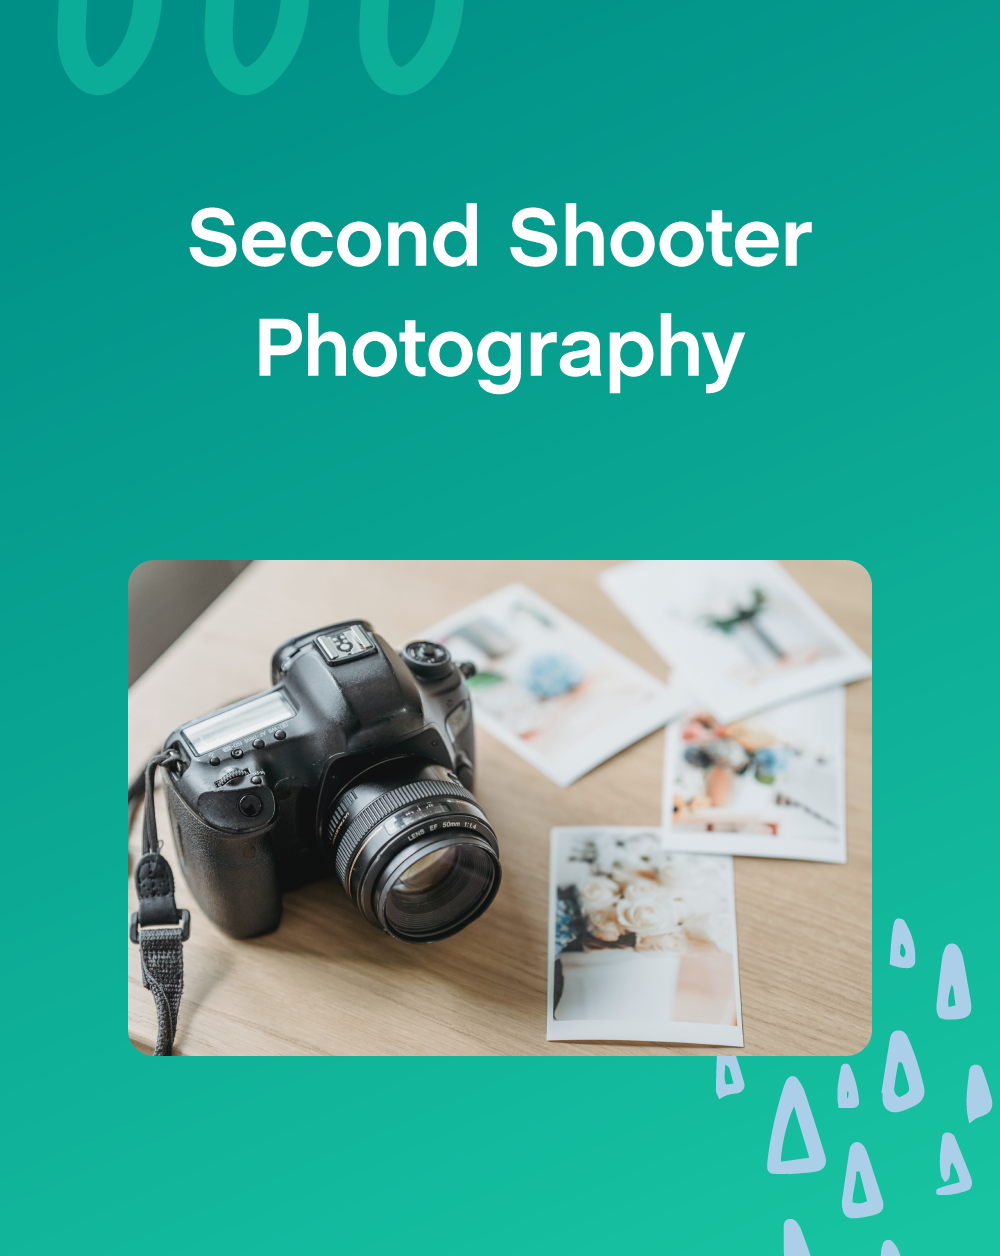 Second Shooter Photography Contract Template - The Contract Shop®